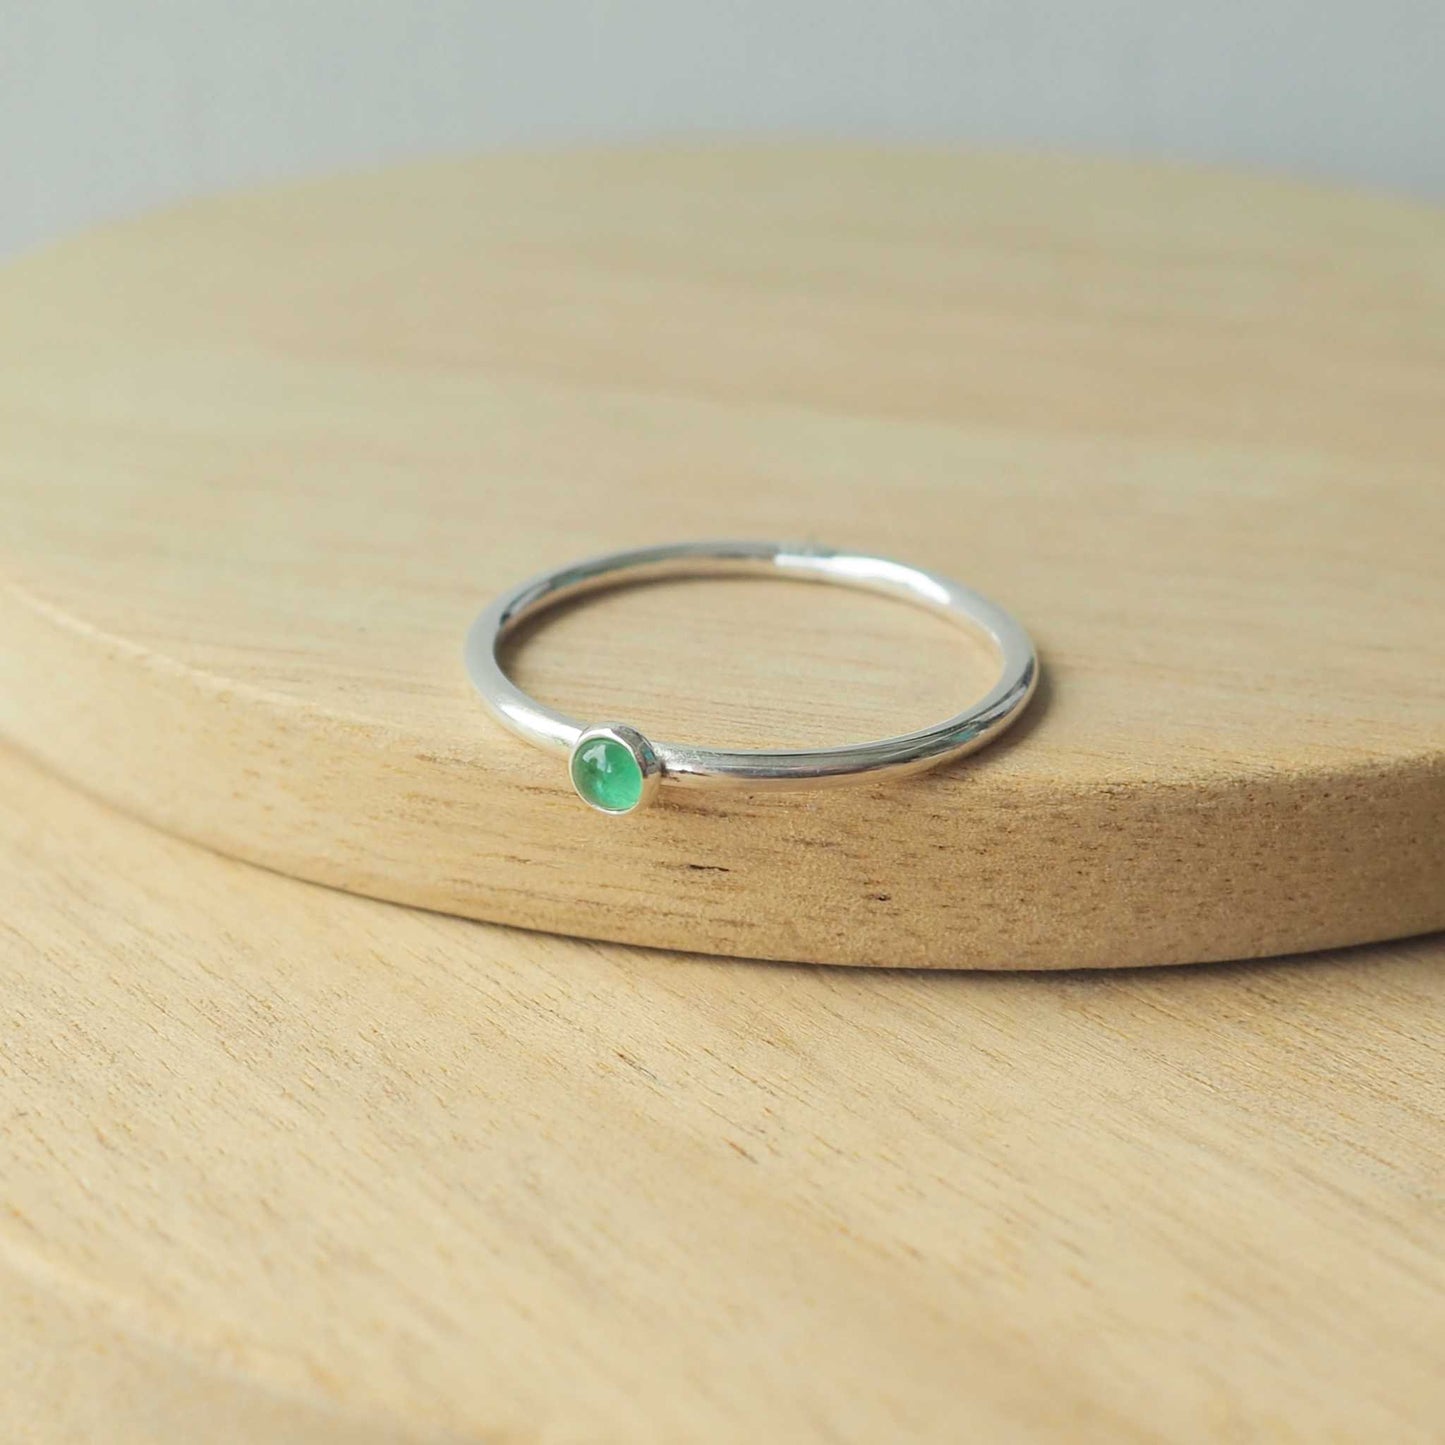 Simple Silver and Emerald ring with a round 3mm green emerald, May's Birthstone. Handmade by Maram Jewellery in Scotland